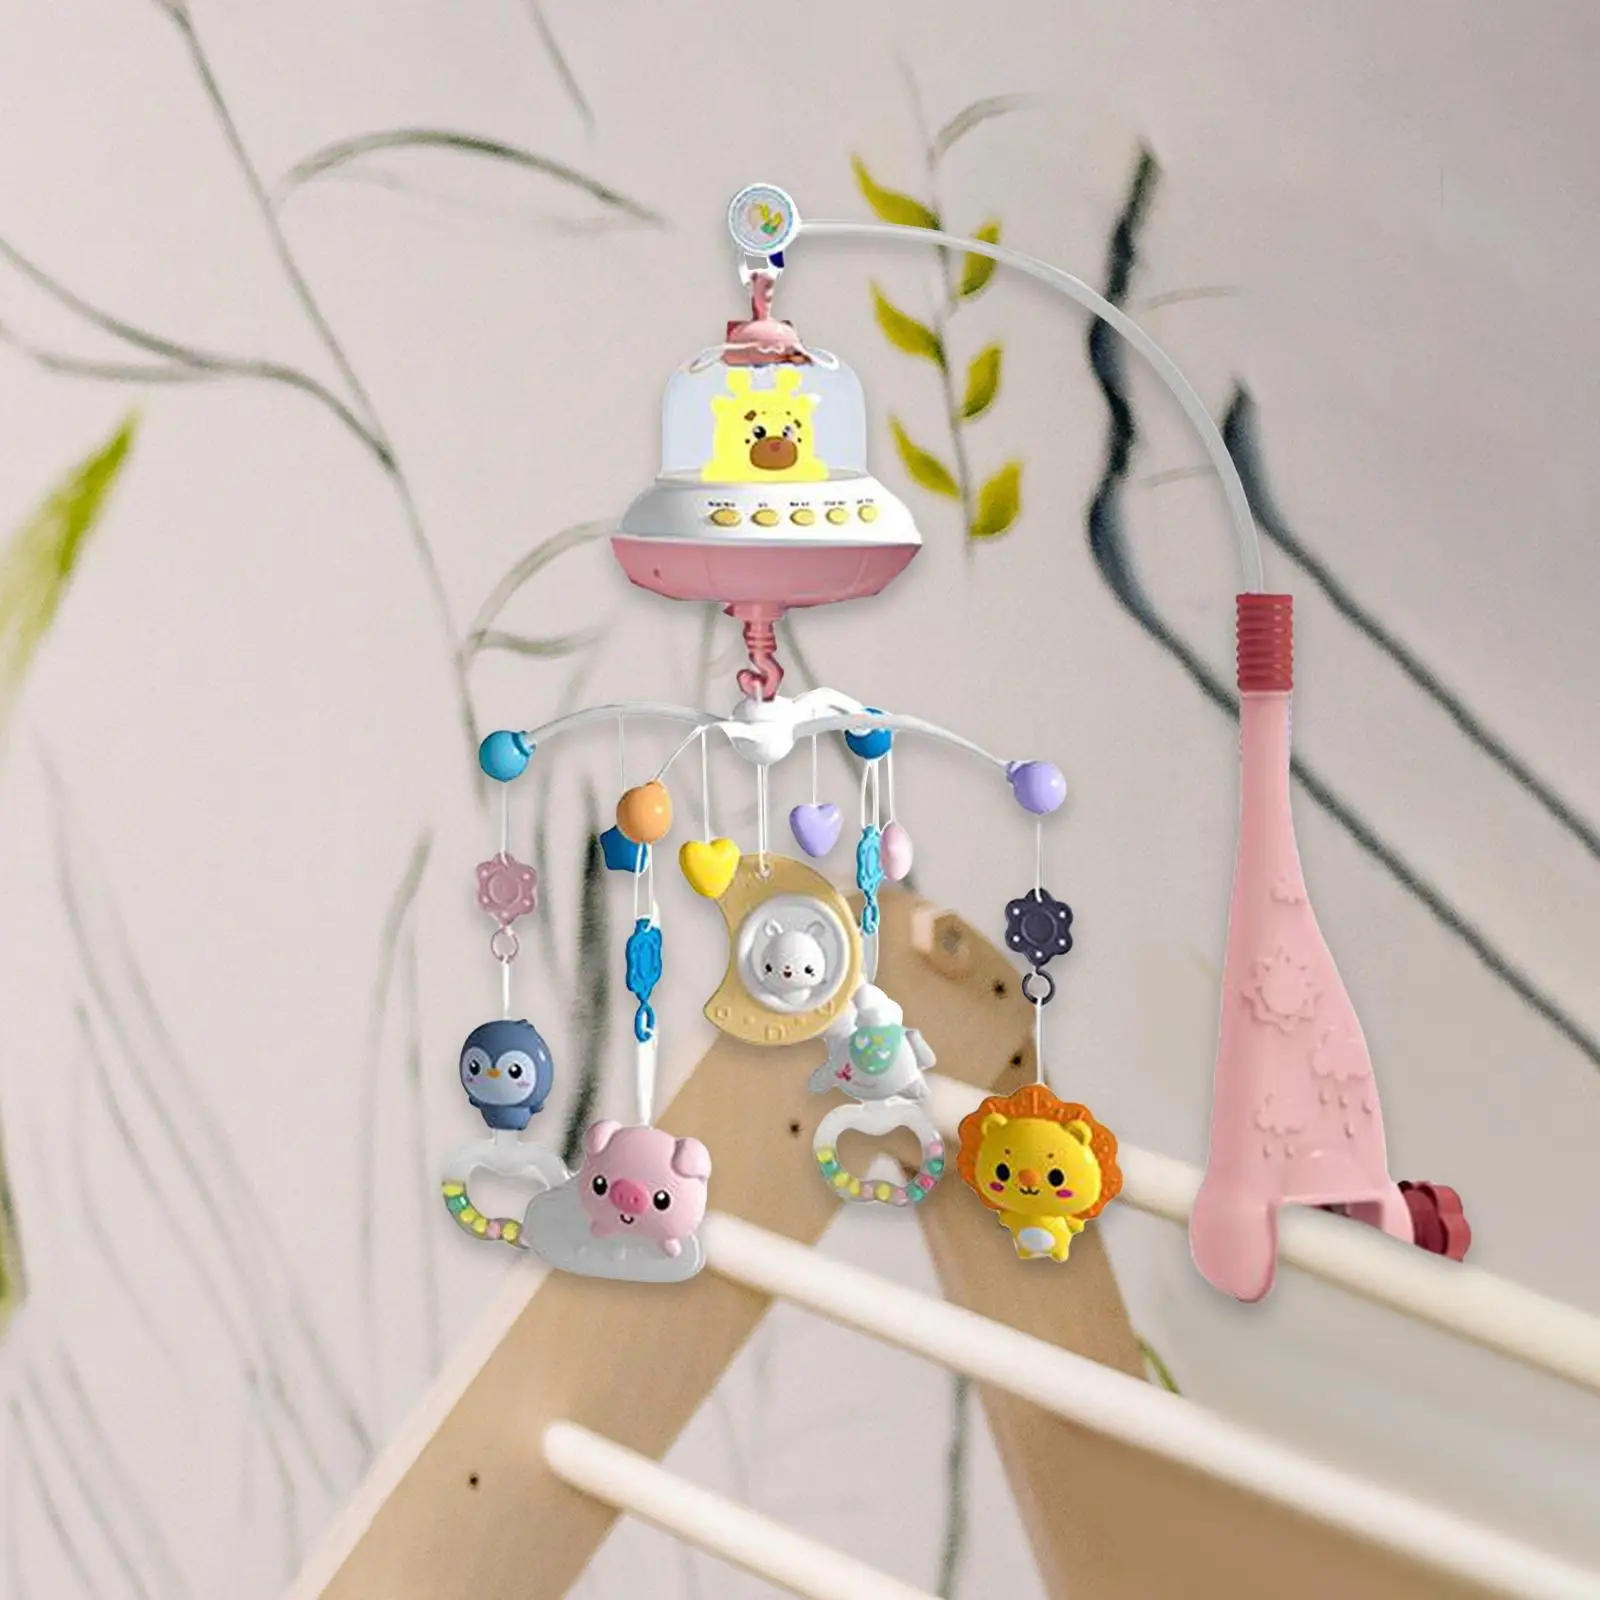 Baby Crib Mobile with Lights and Music Rattles with Remote Control Musical Crib Mobile for Babies Ages 0 and Older Birthday Gift